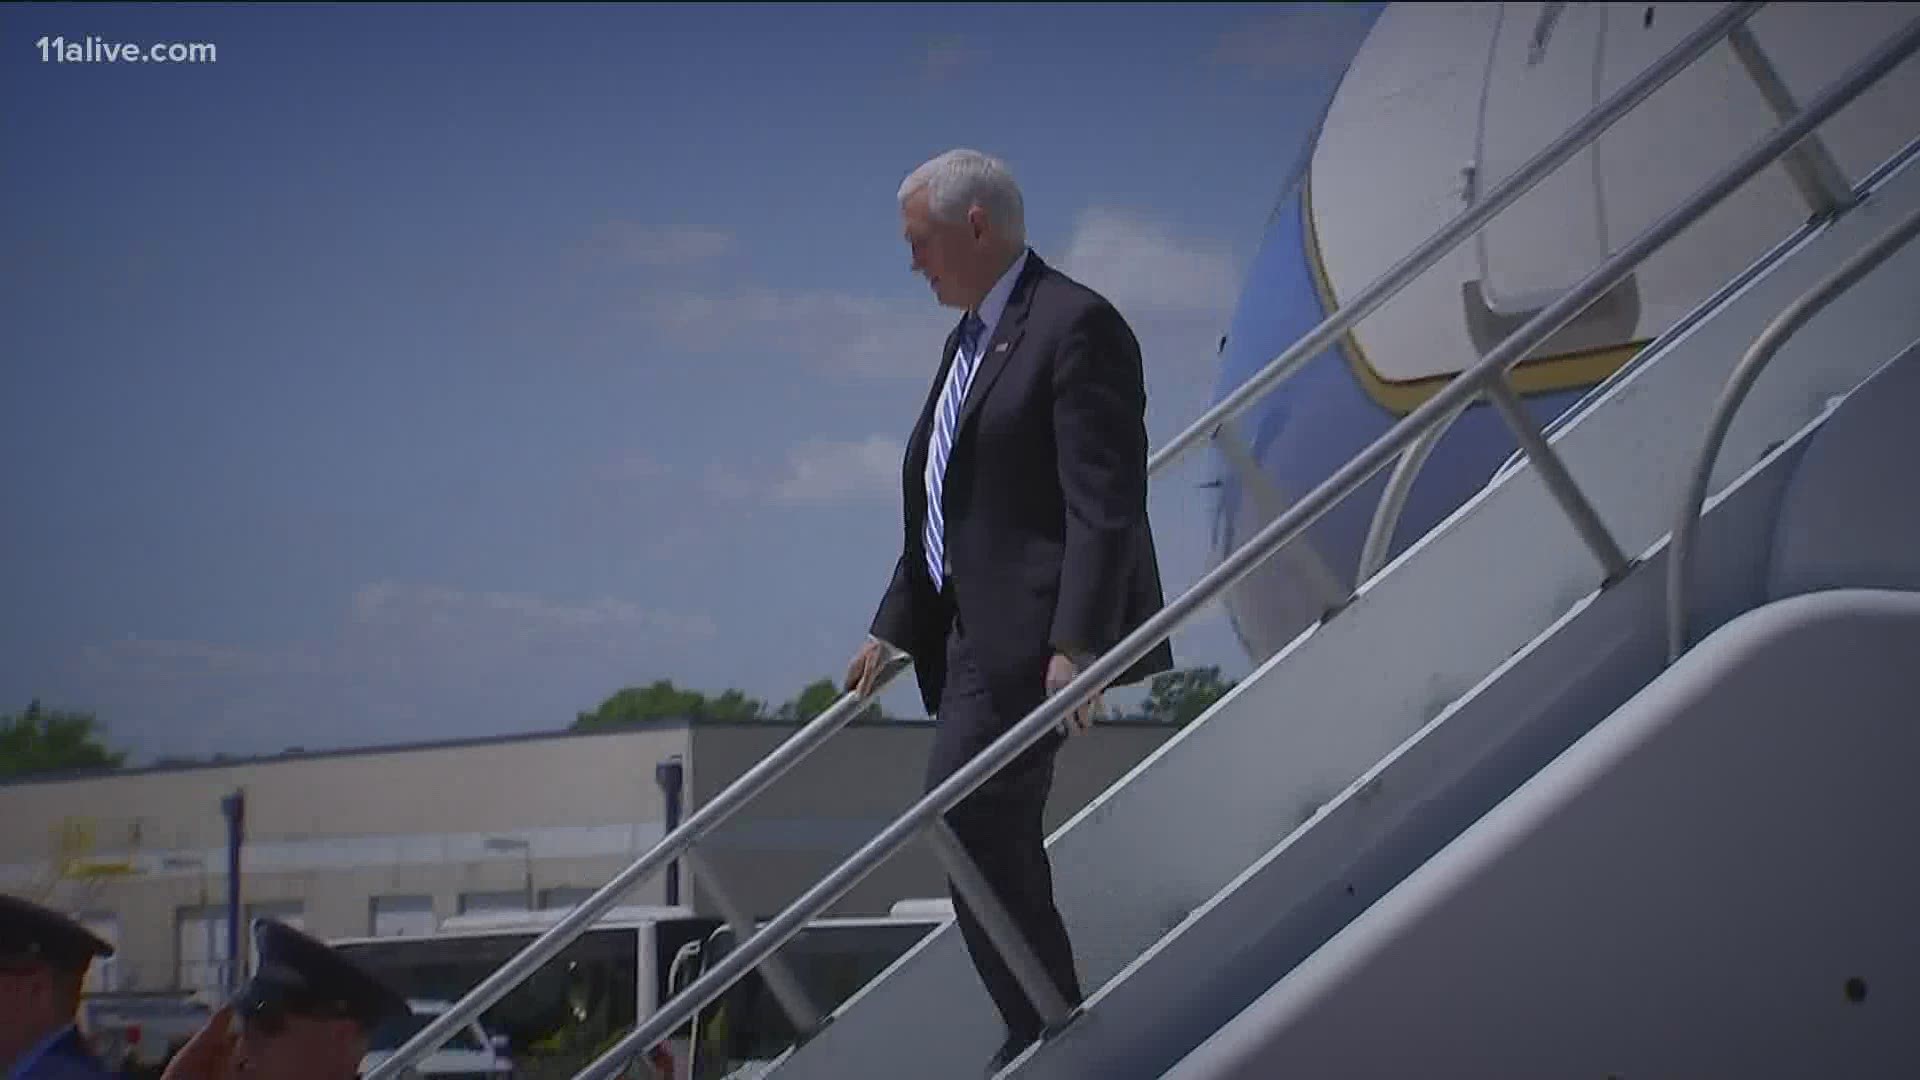 Here's what we know about the Vice President's visit.